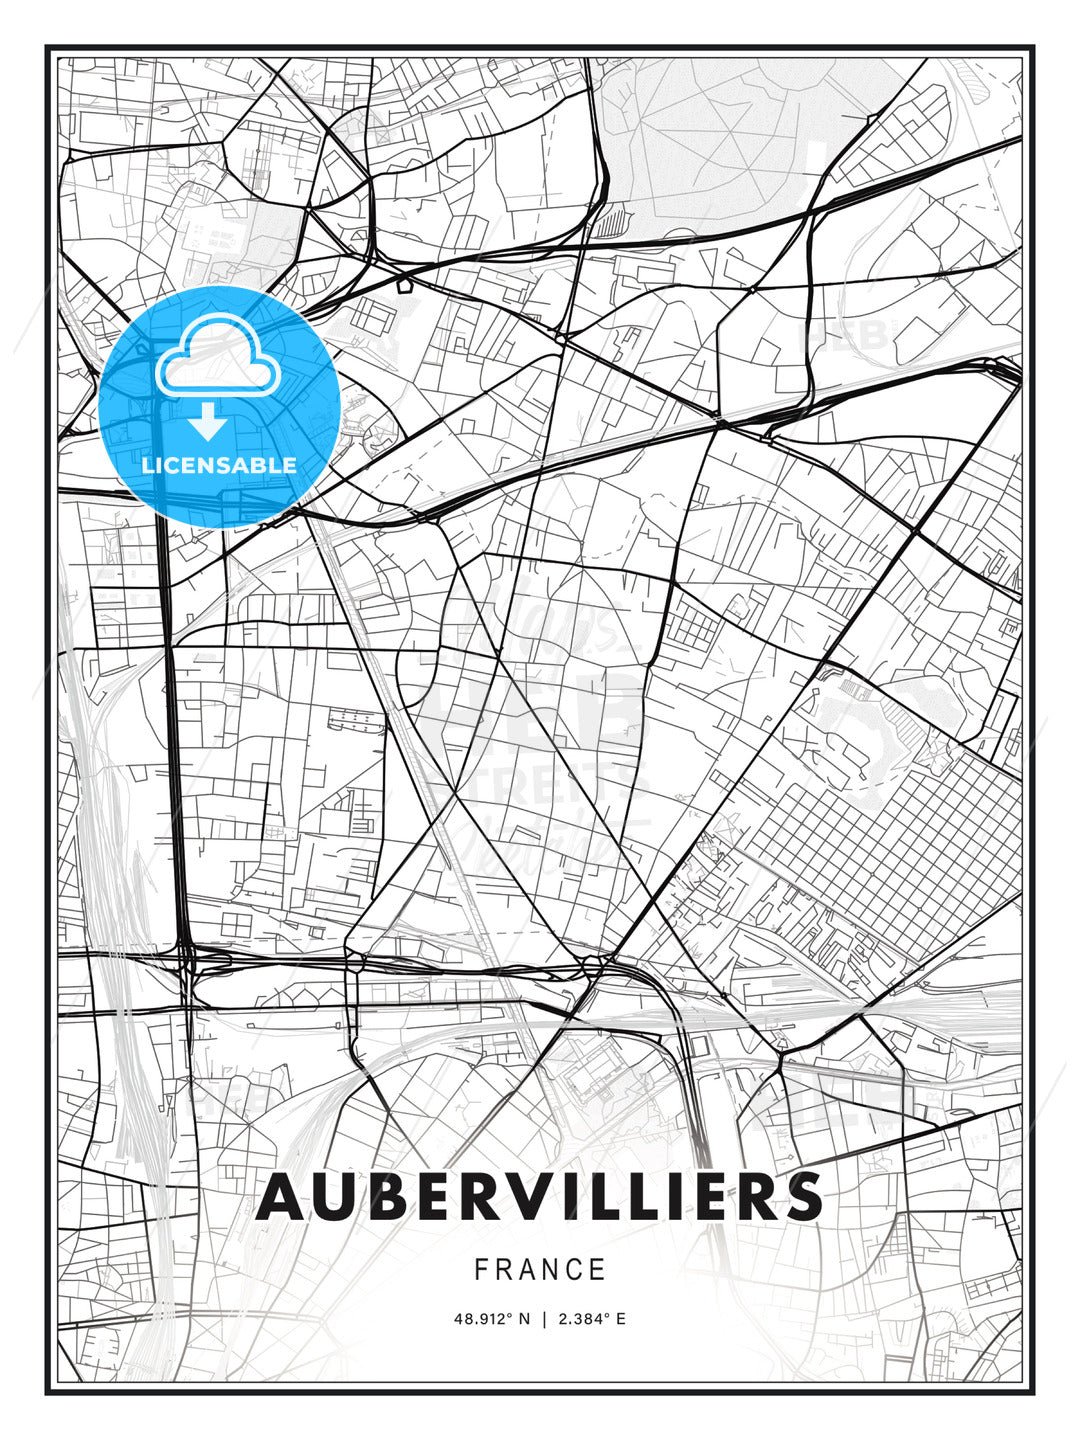 Aubervilliers, France, Modern Print Template in Various Formats - HEBSTREITS Sketches